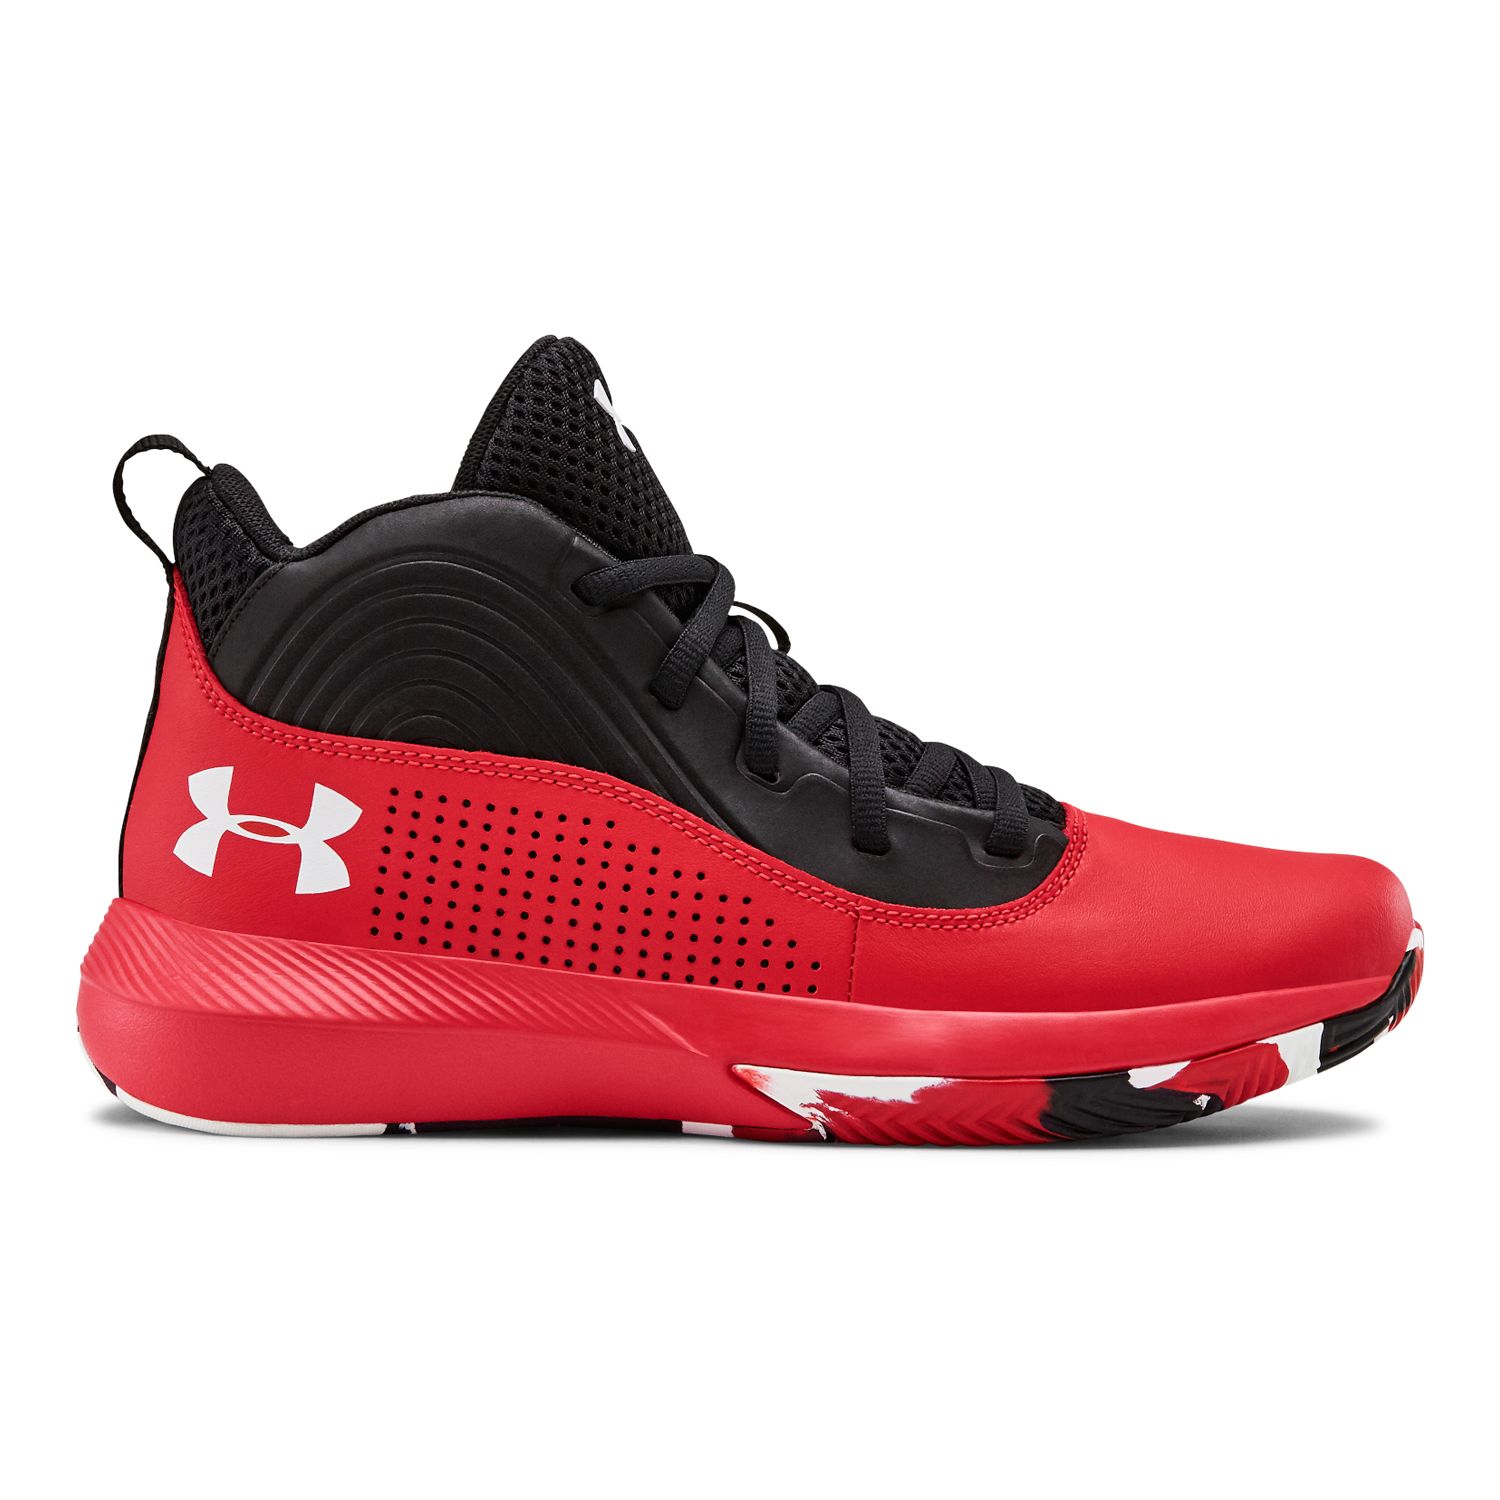 under armour red and white shoes